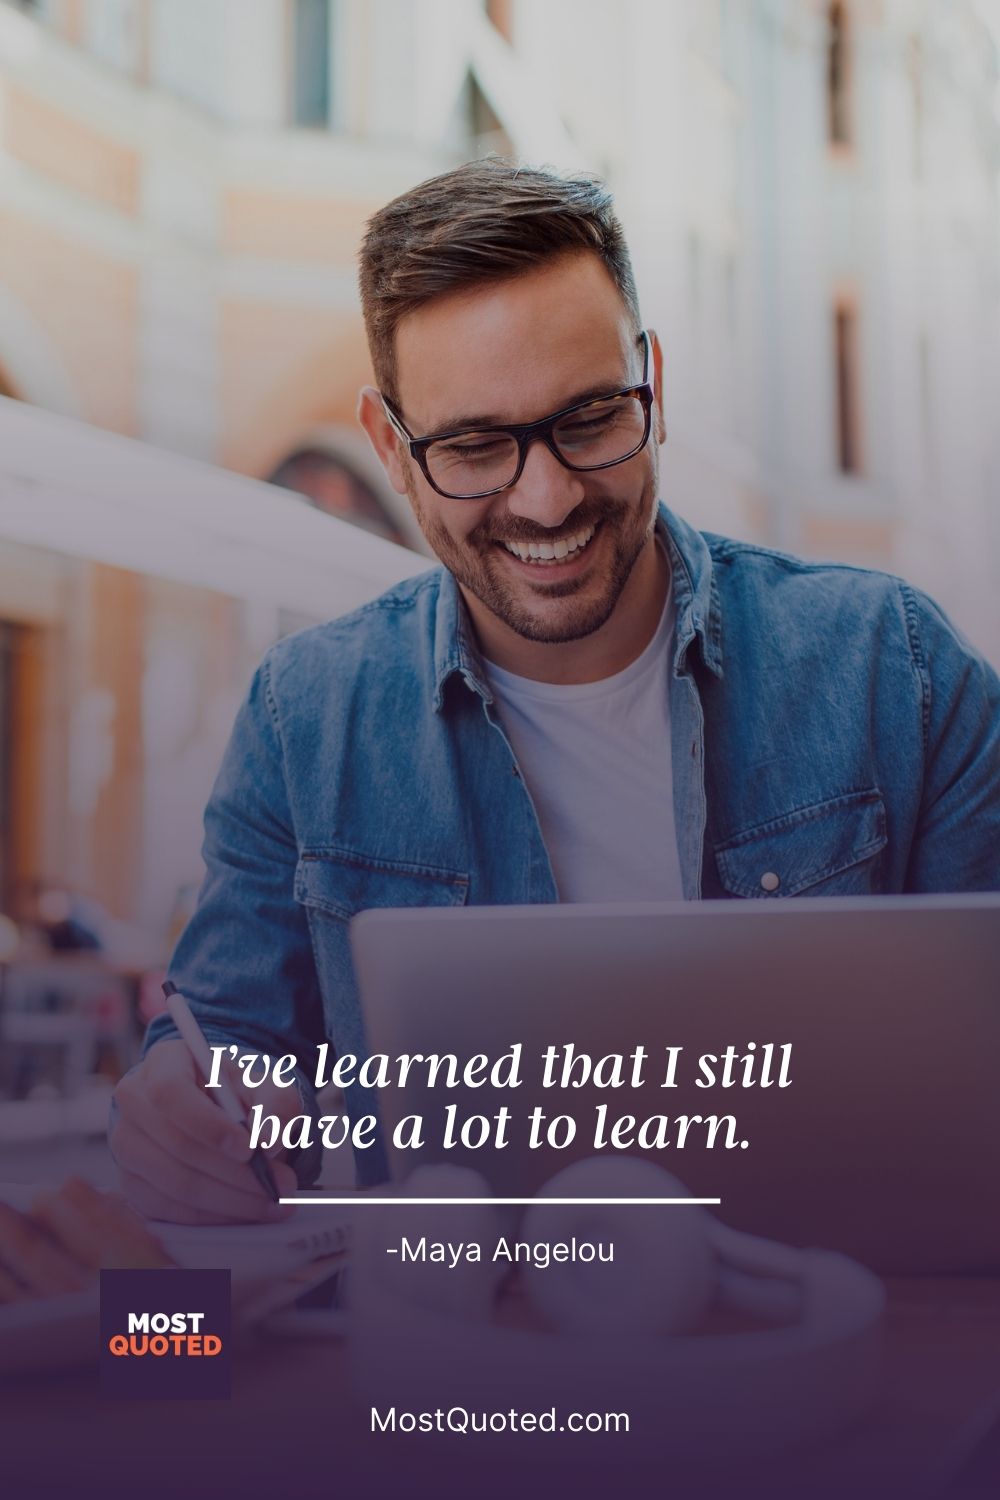 I’ve learned that I still have a lot to learn. - Maya Angelou